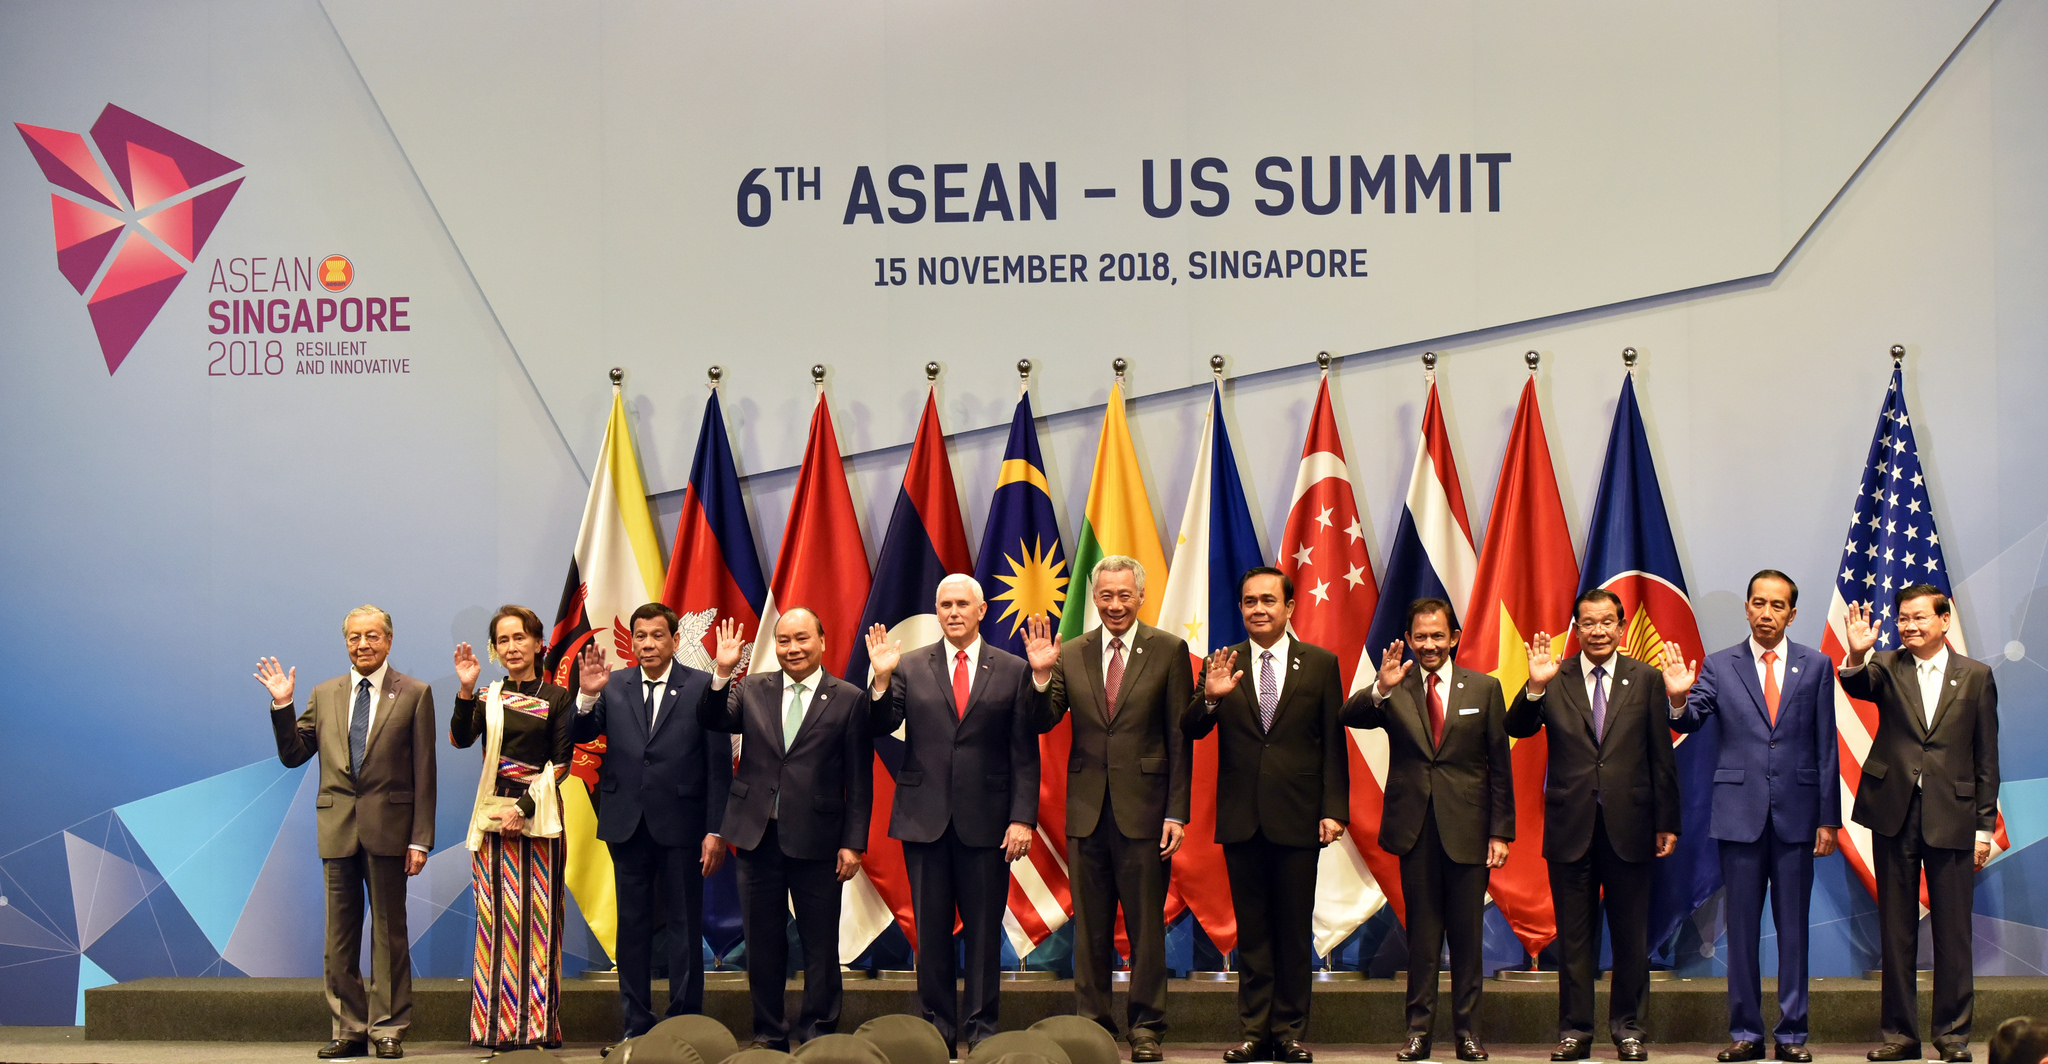 Chairman’s Statement of the 6th ASEANUnited States Summit ASEAN Main